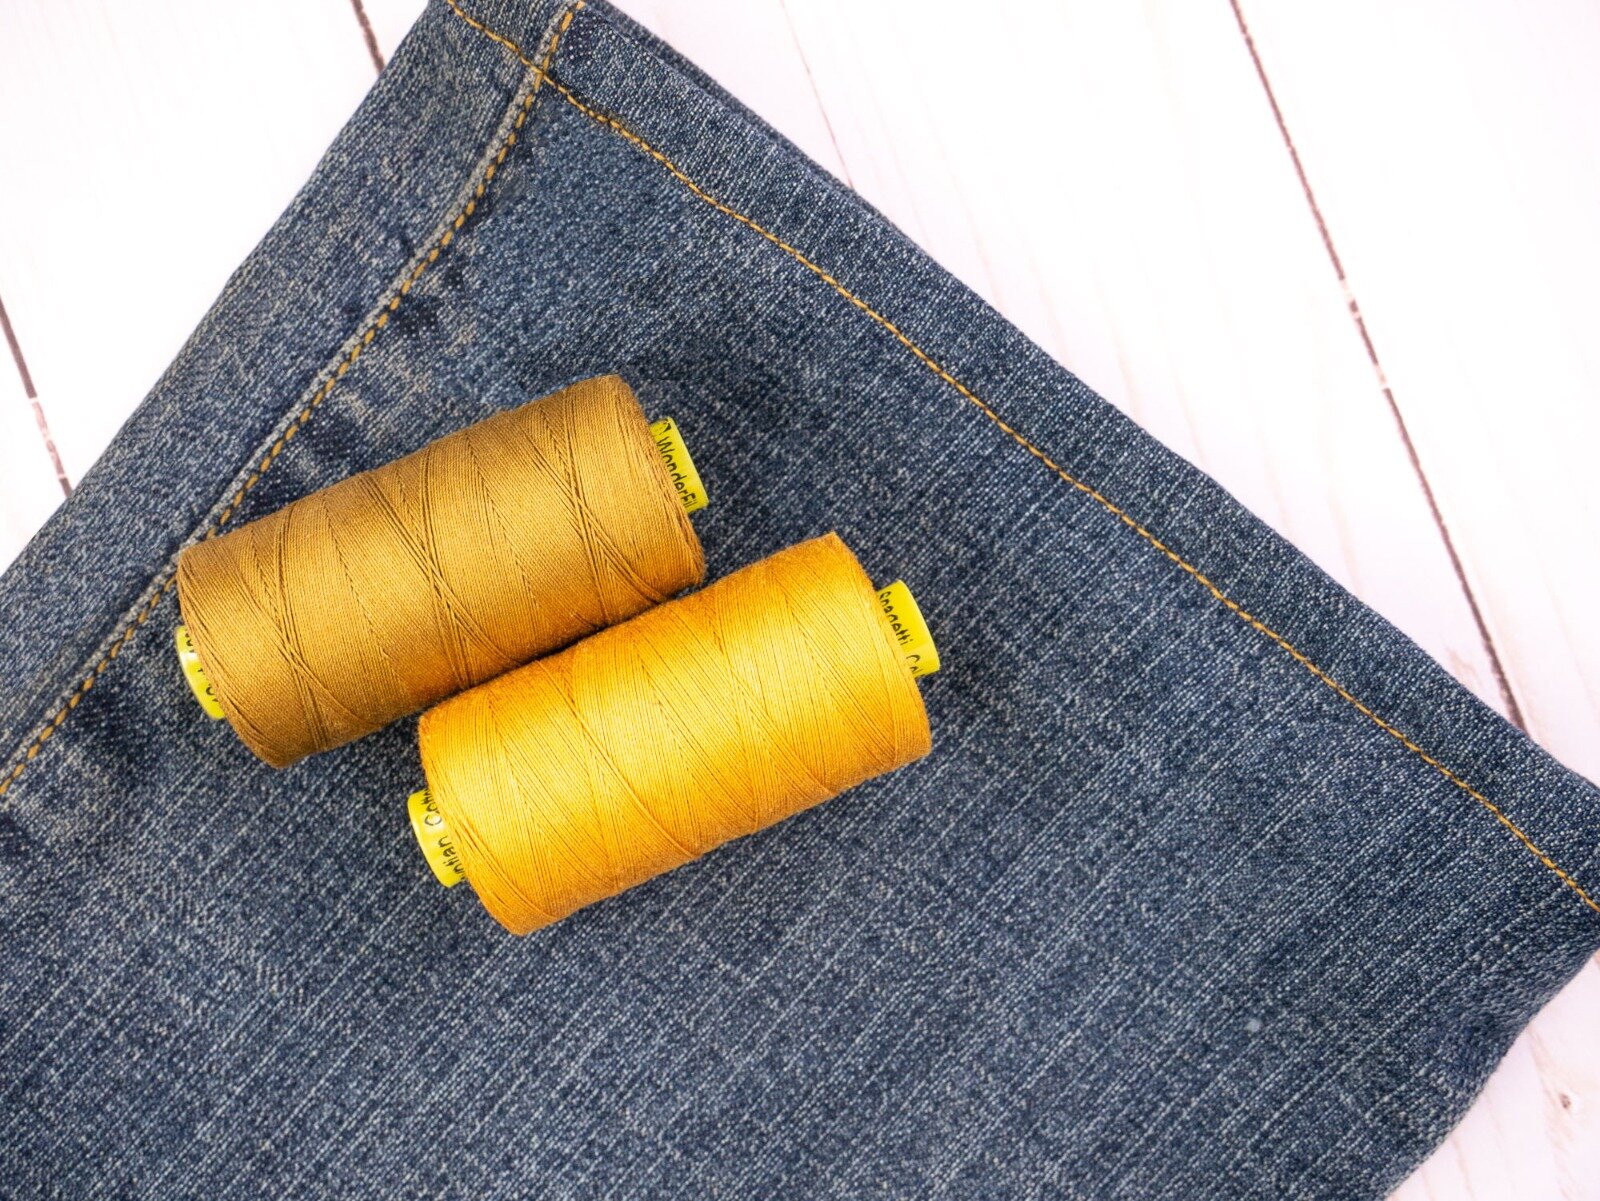 WonderFil Specialty Threads - The Easiest Way to Hem a Pair of Jeans